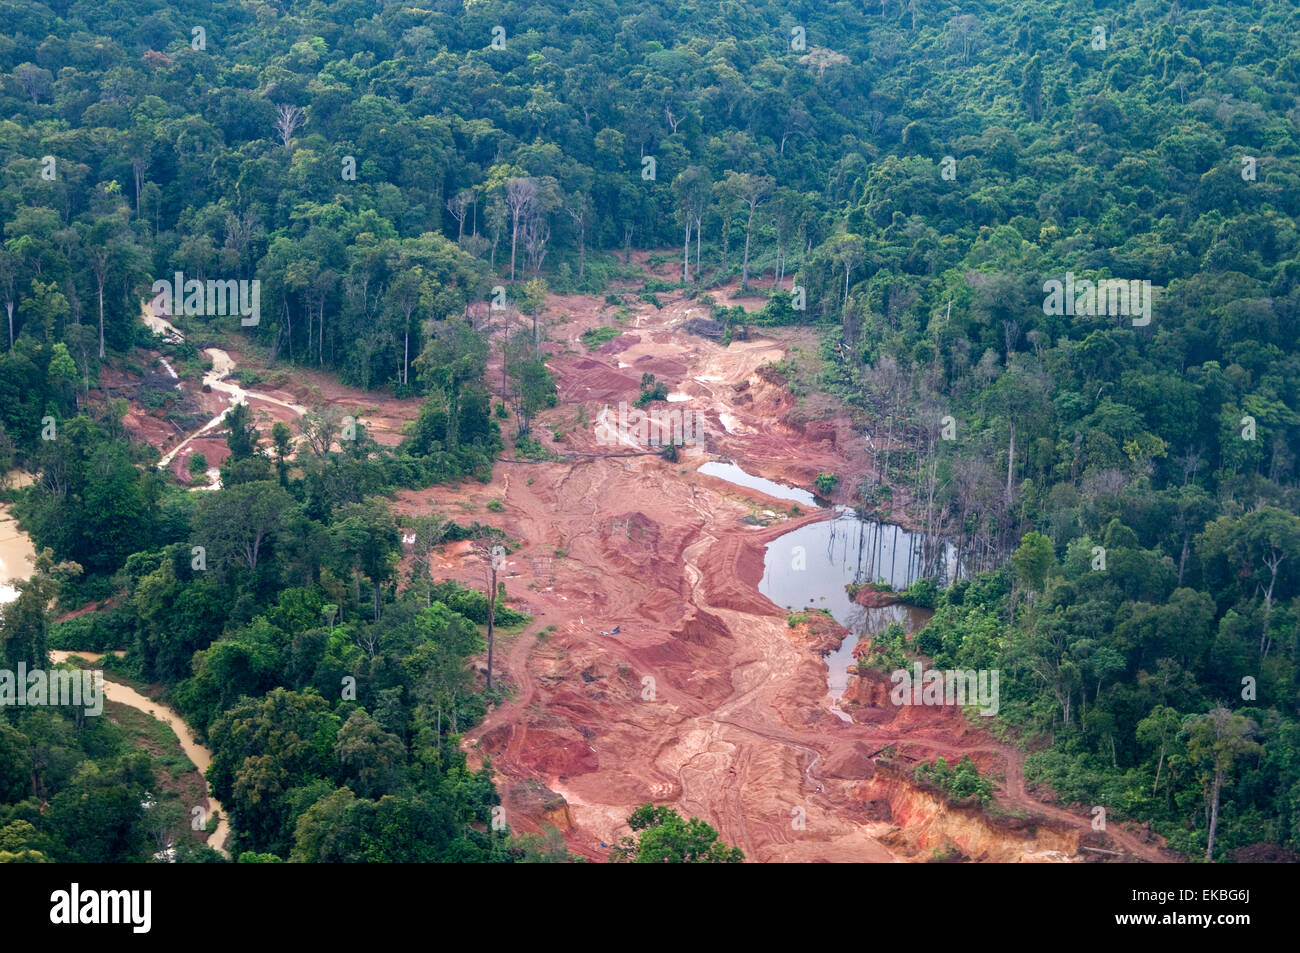 Destruction of rainforest caused by gold mining, Guyana, South America Stock Photo